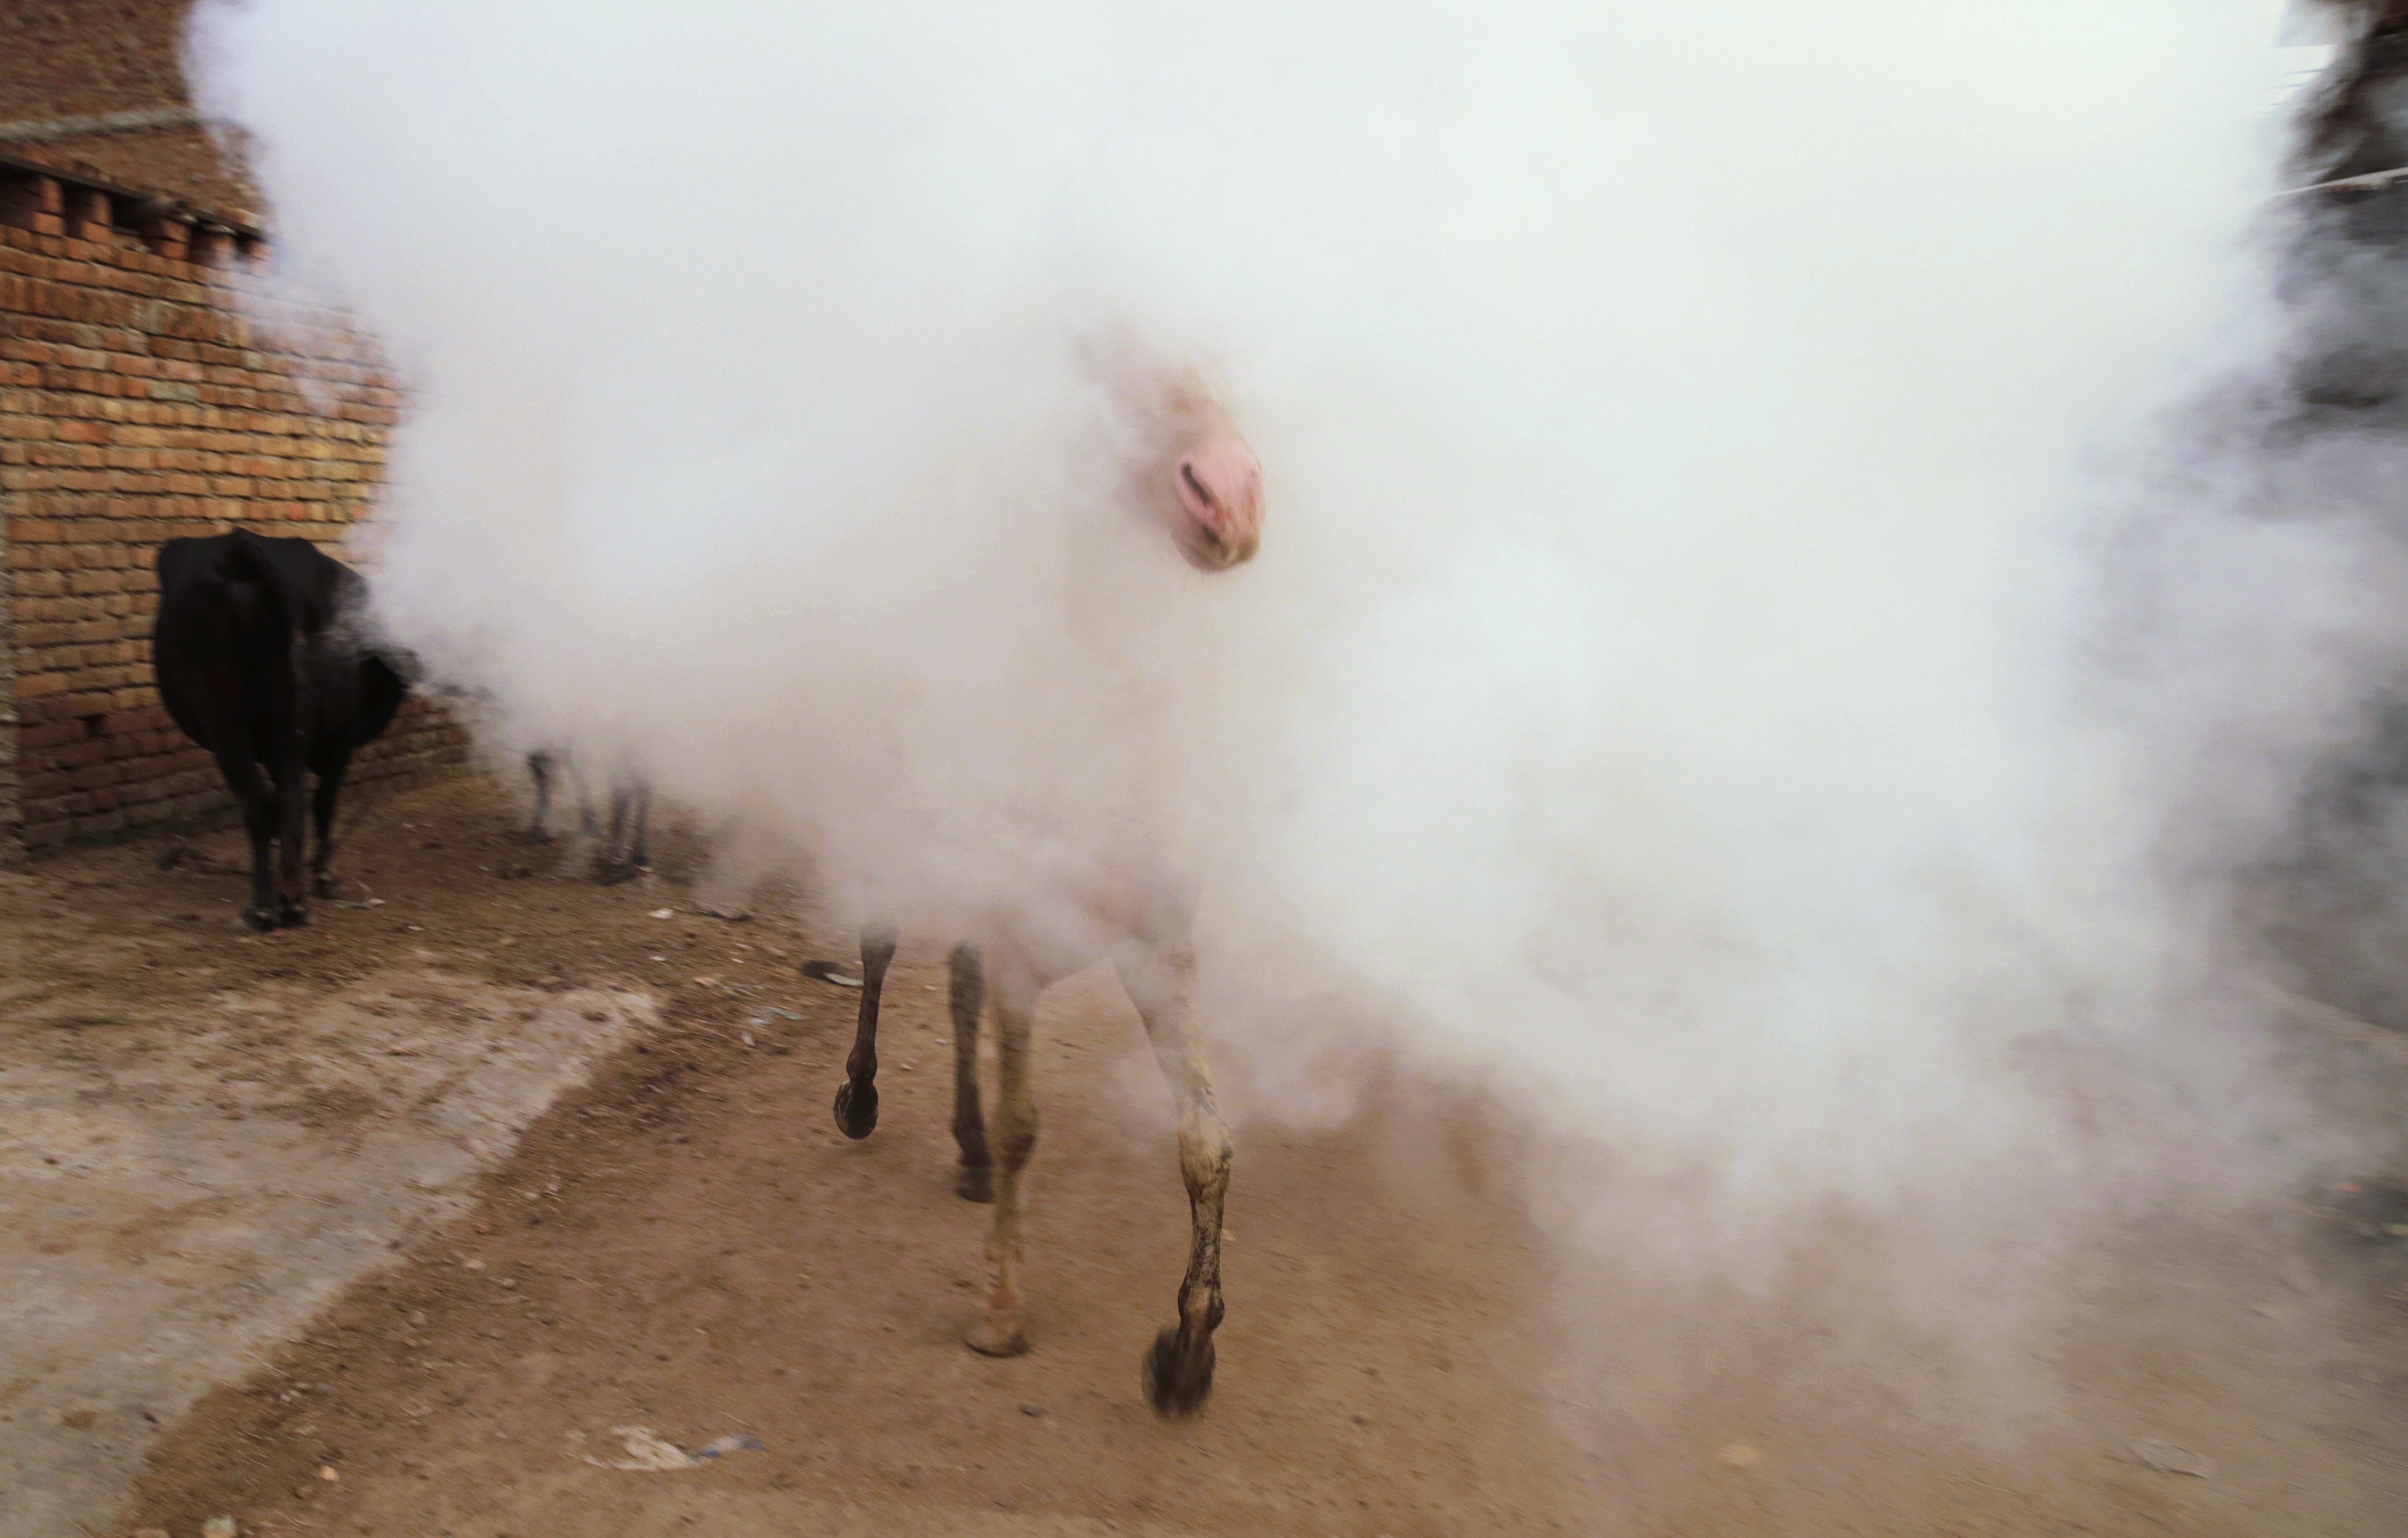 A horse makes its way through a cloud of smoke rising from fumigation being done to prevent mosquito-borne diseases in Allahabad, India, on Sept. 9, 2016.